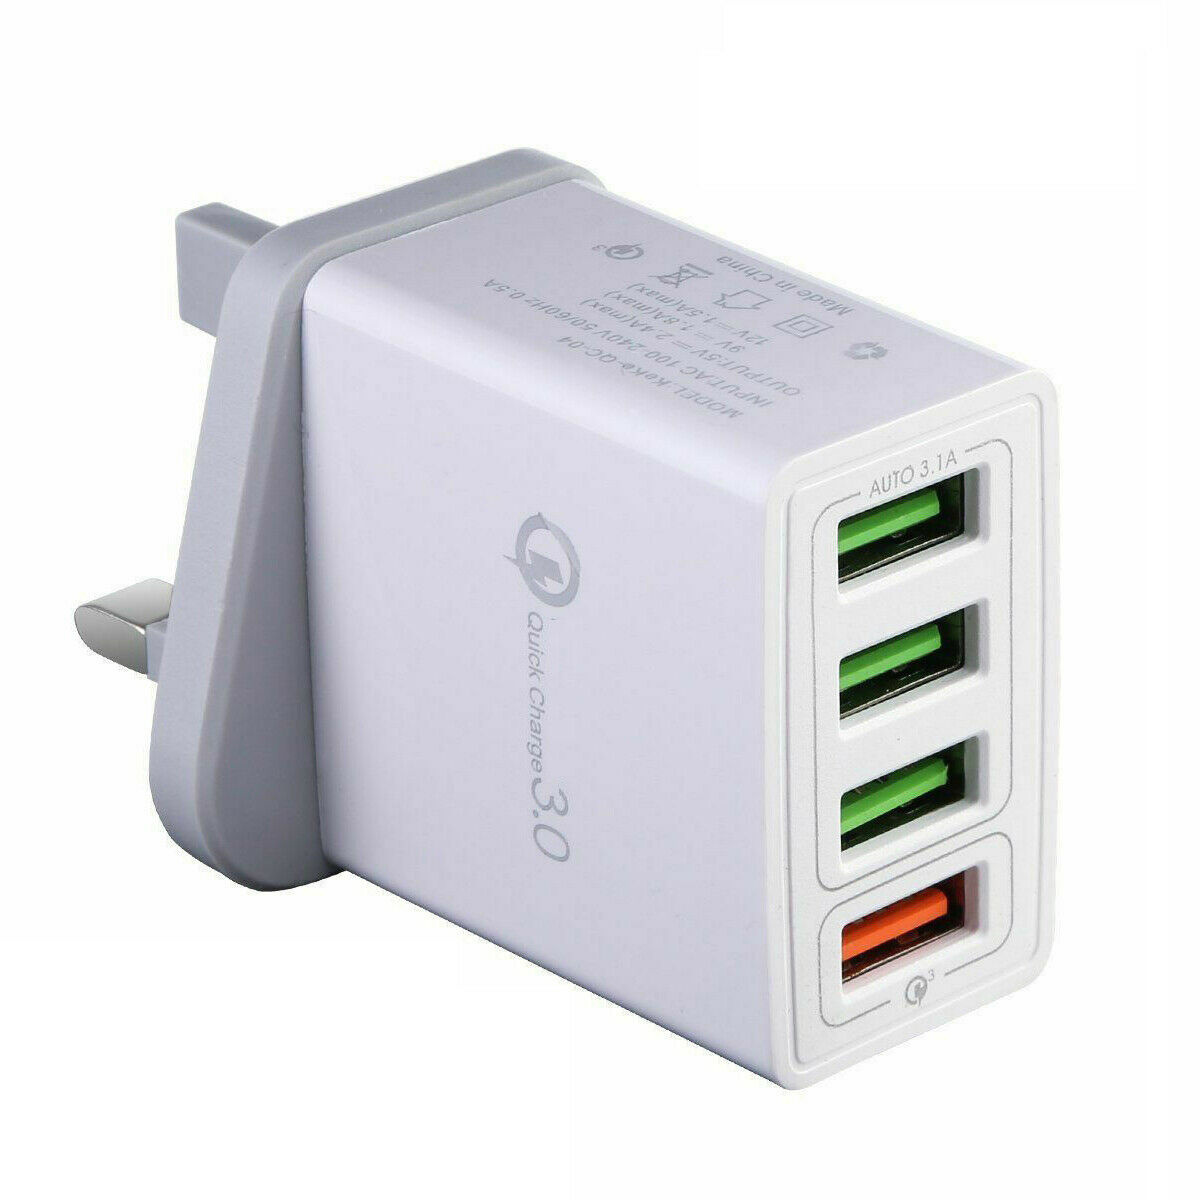 [Indonesia Direct] 4 Multi-Port Fast Quick Charge QC 3.0 USB Hub Wall Charger Adapter UK Plug white